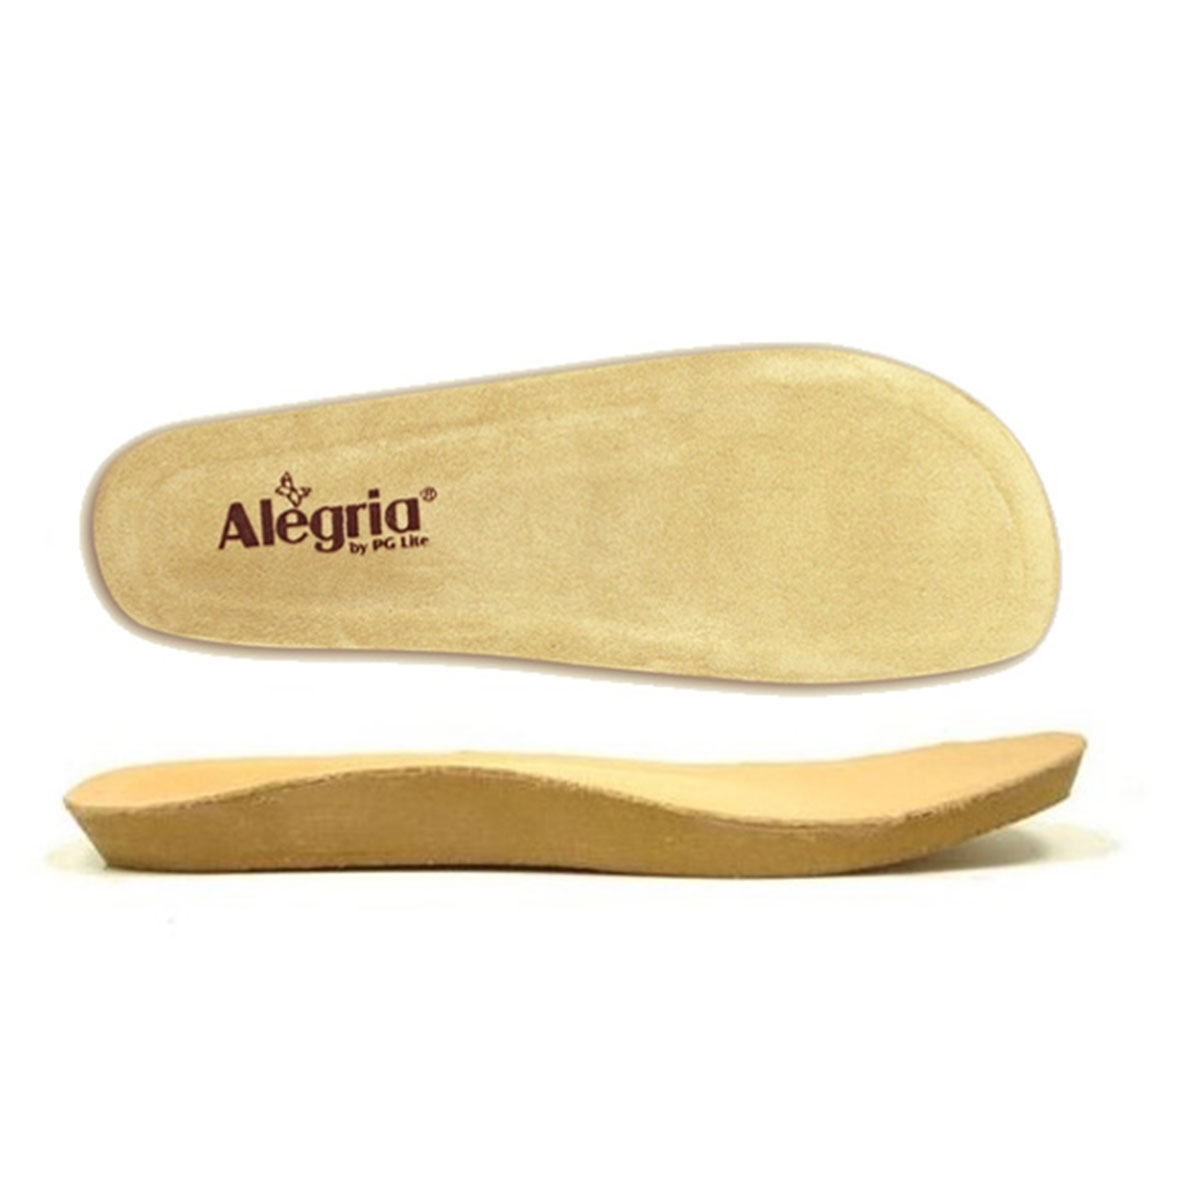 Alegria Shoes - Replacementserts